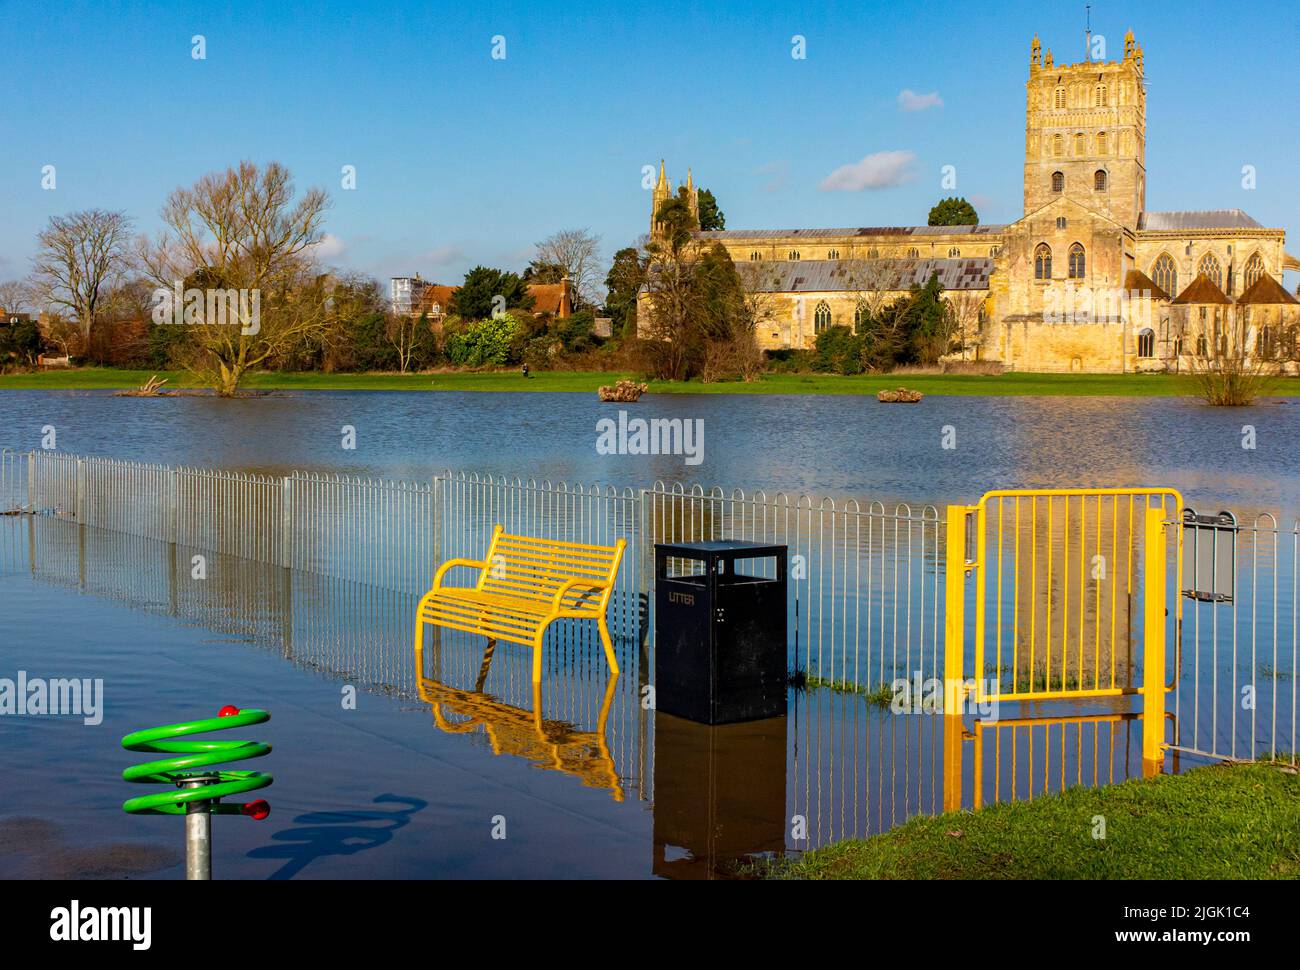 Severe flooding in Tewkesbury Gloucestershire England UK at the point where the Rivers Severn and Avon meet photographed in February 2022. Stock Photo